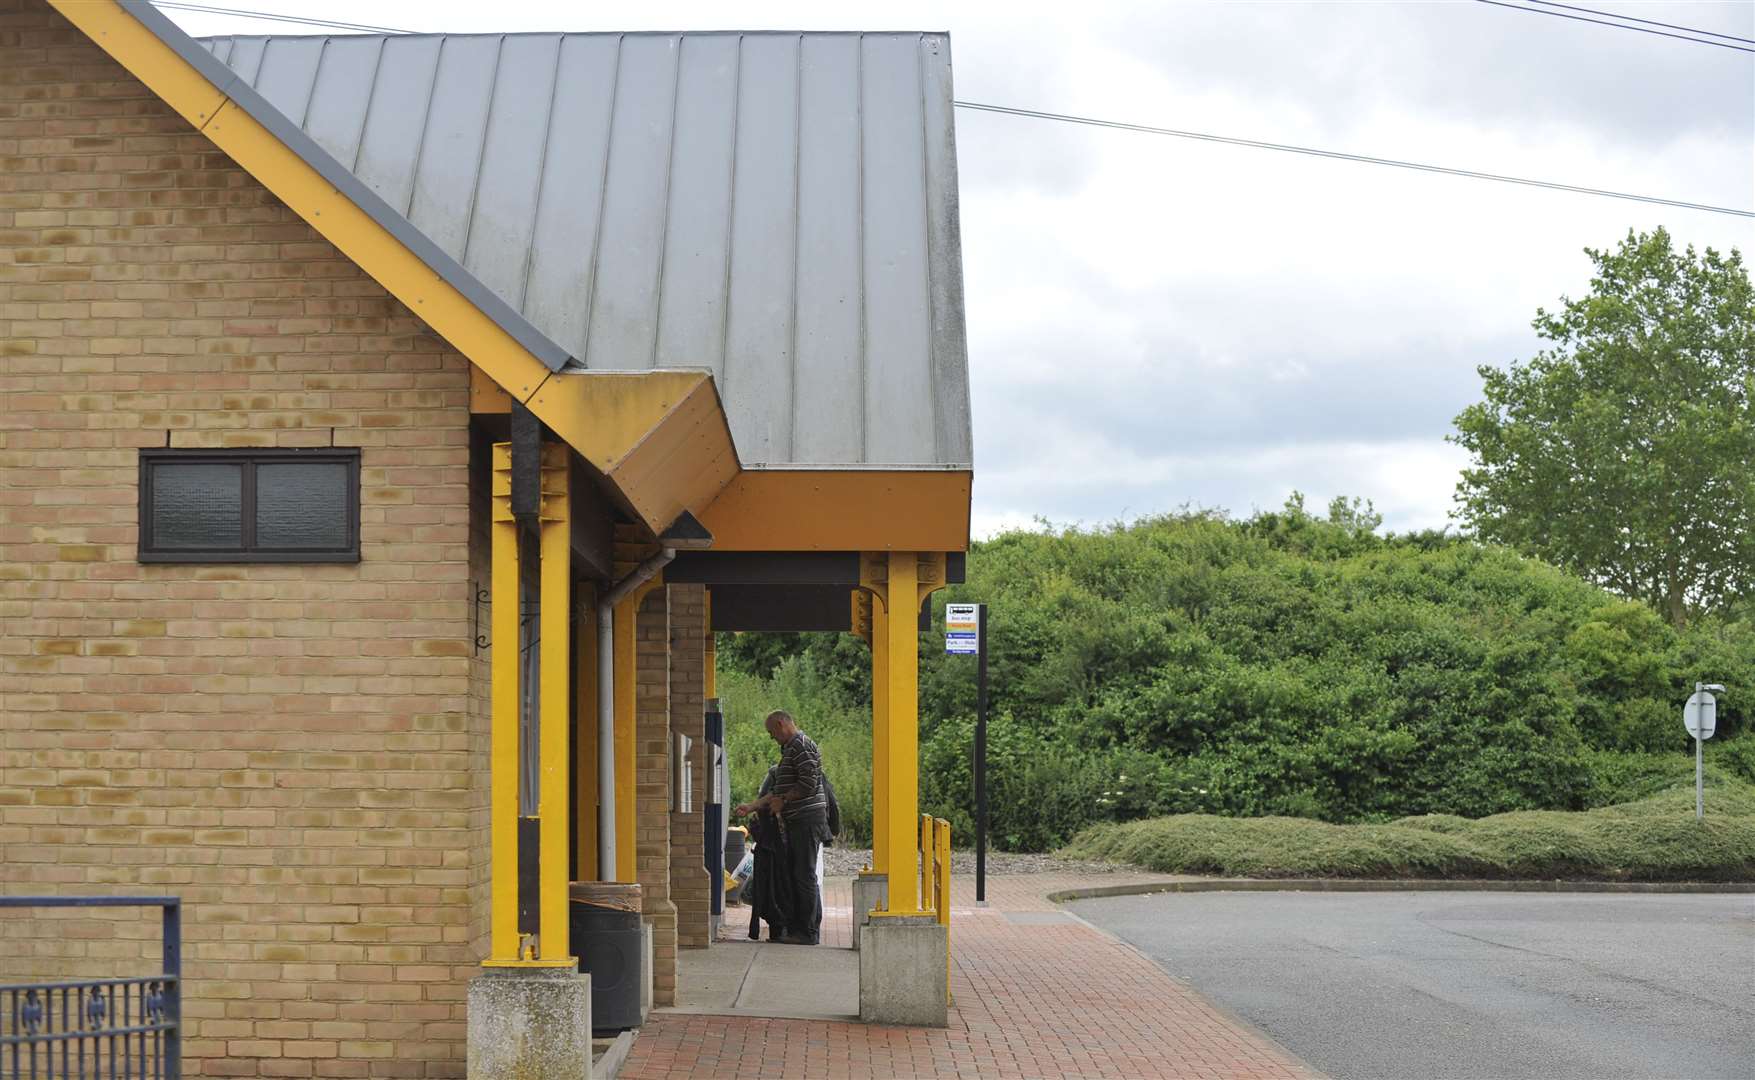 The Sturry Road park and ride building is shut this weekend